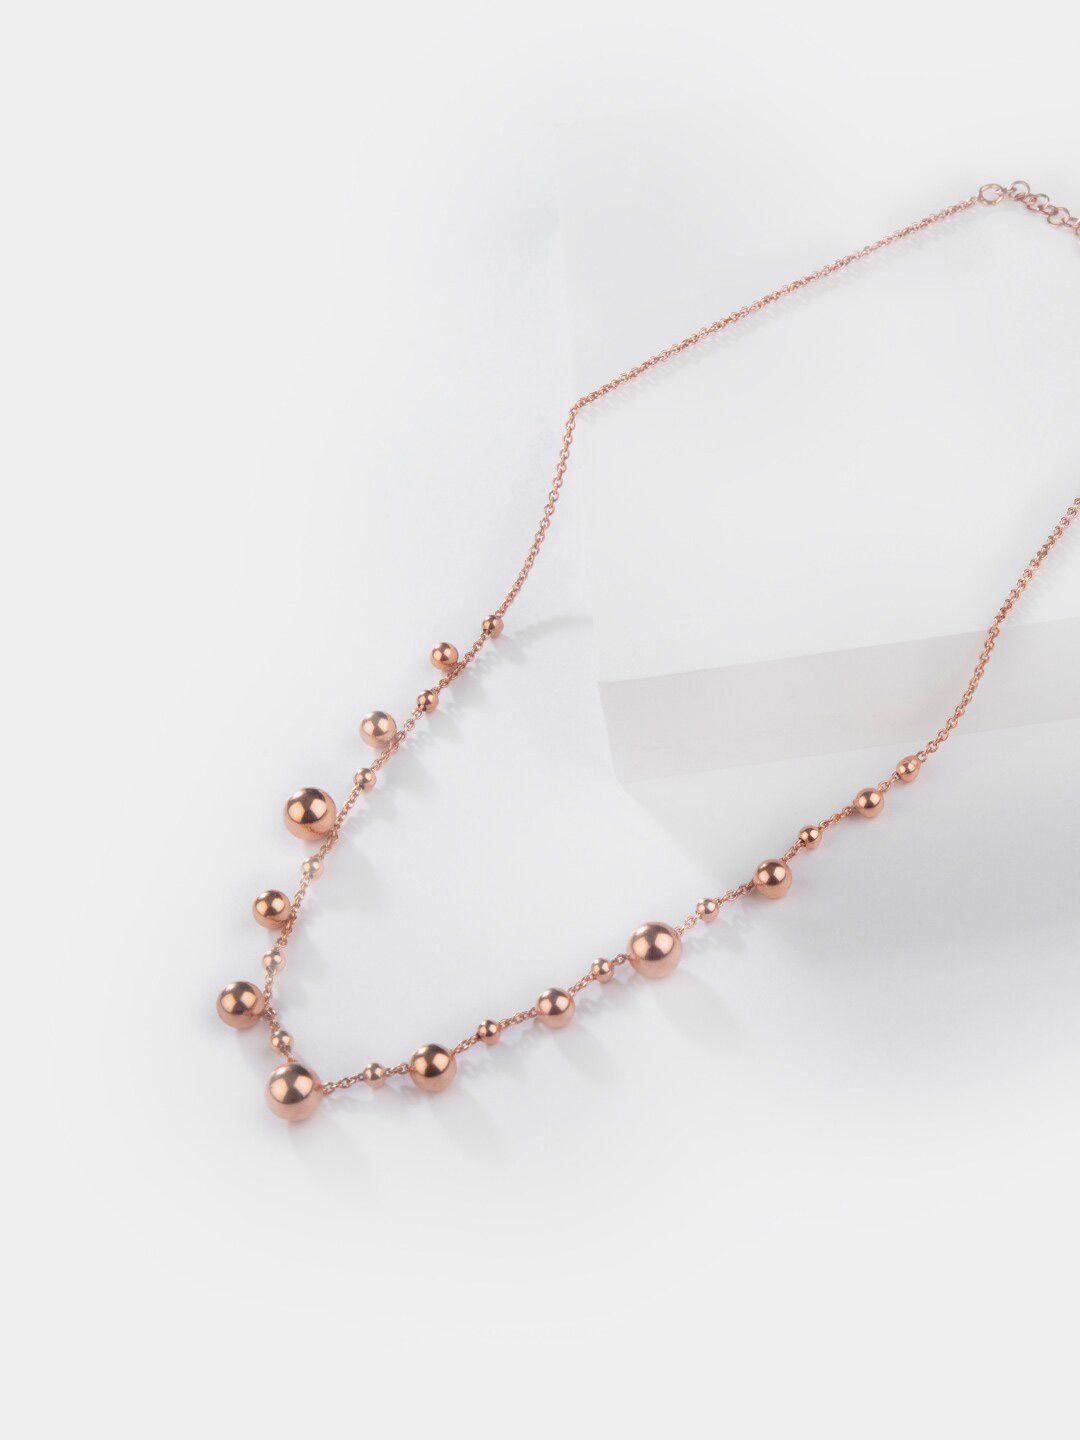 shaya rose gold sterling silver necklace